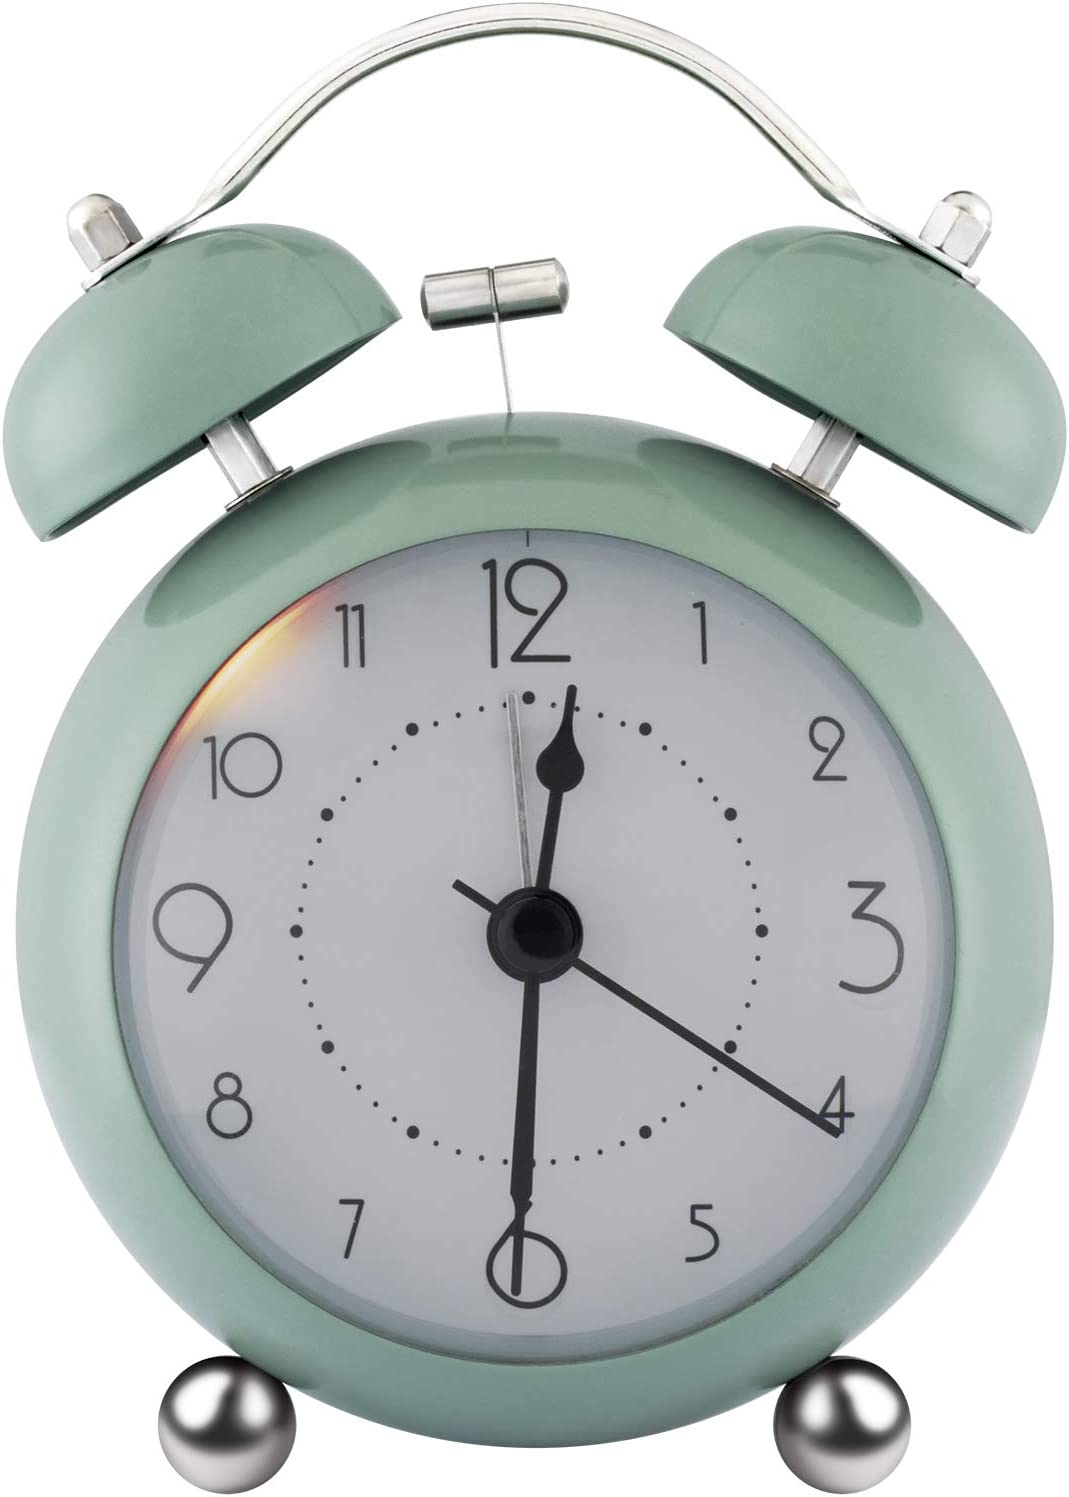 ZOJI Retro Twin Bells Bedside Alarm Clock, Non-Ticking 3.34-Inch Round Convex Mini Clock with Nightlight, Large Digital Display Clock for Bedroom, Office, or Travel, Green 4